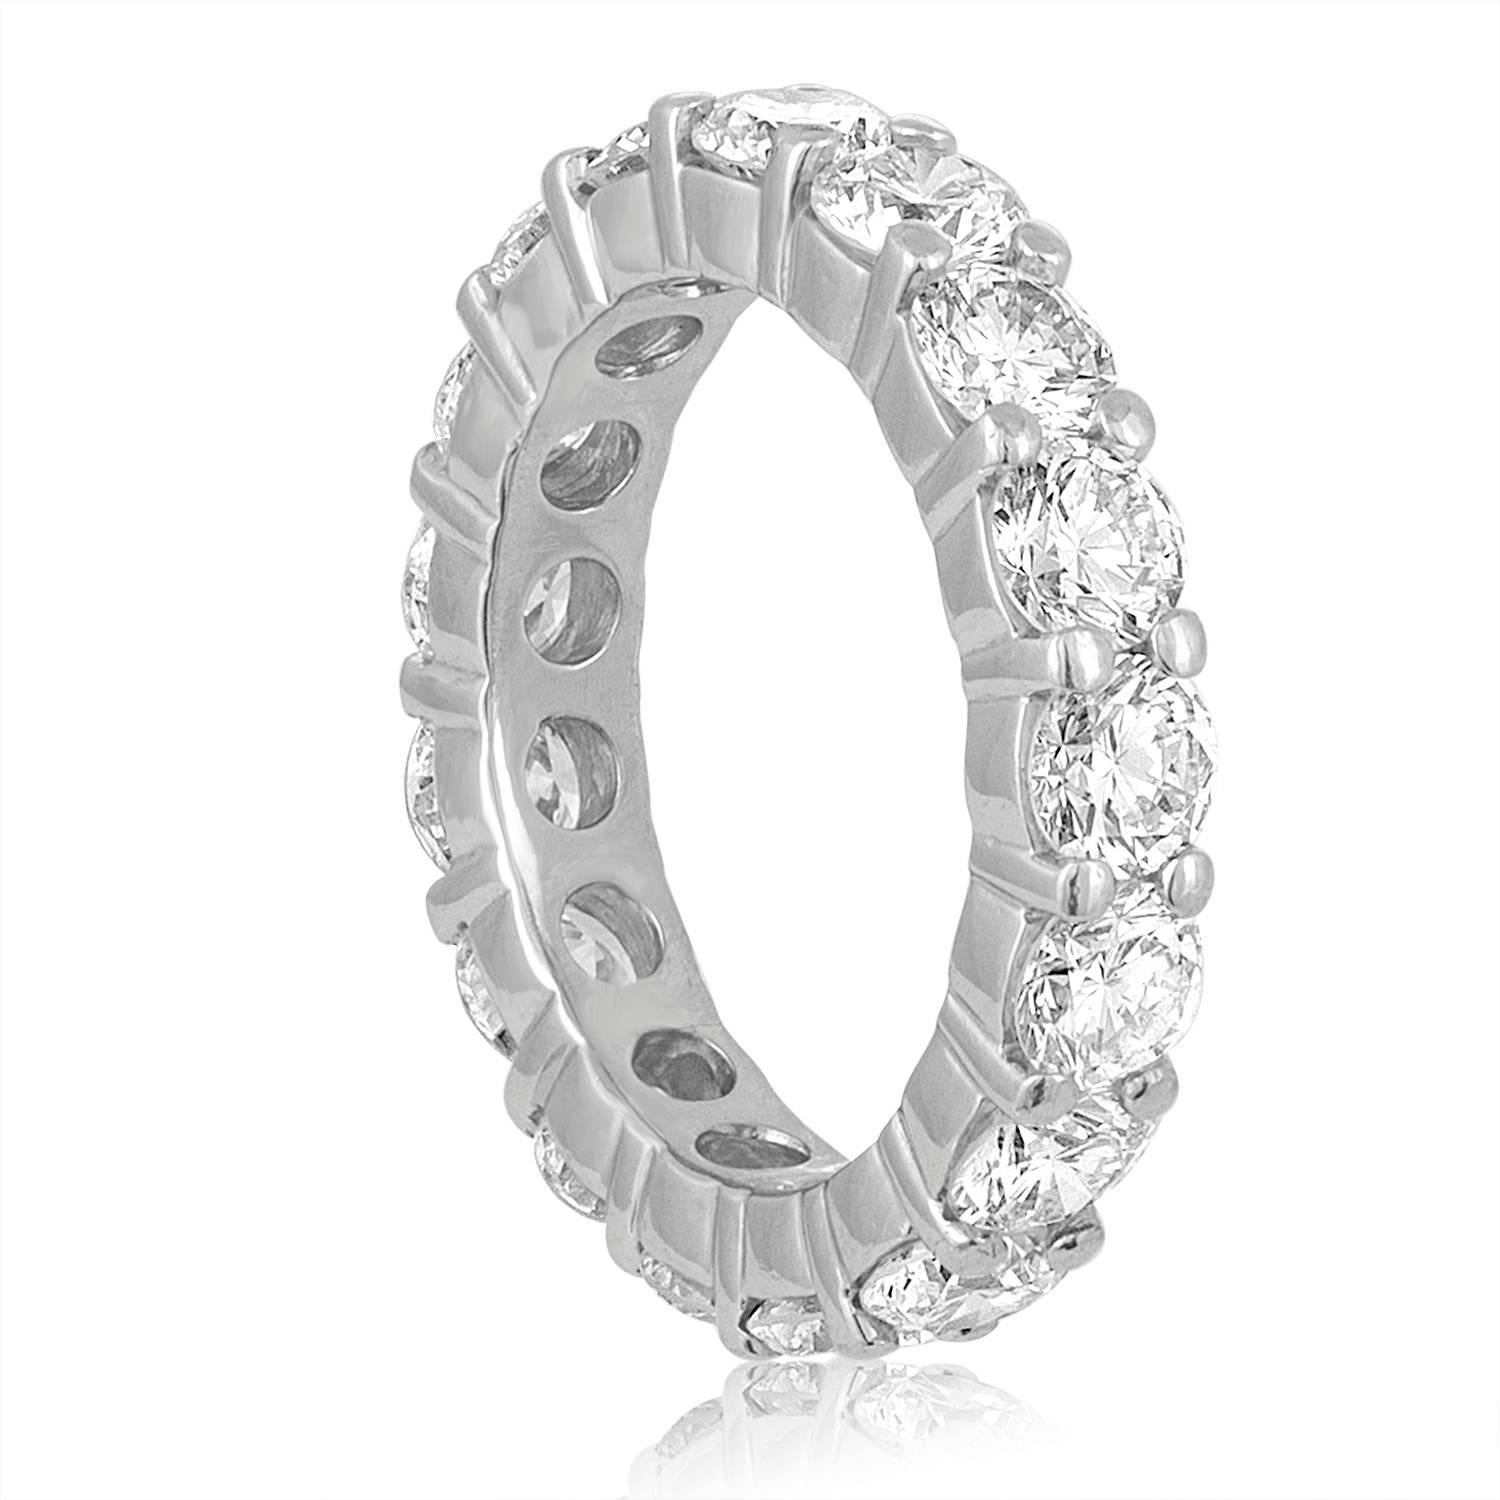 Beautiful Eternity Ring
The ring is Platinum
There are 3.50 Carats In Diamonds F VS
The diamonds are round brilliant
The ring weighs 6.0 grams
The ring is a size 5, not sizable.